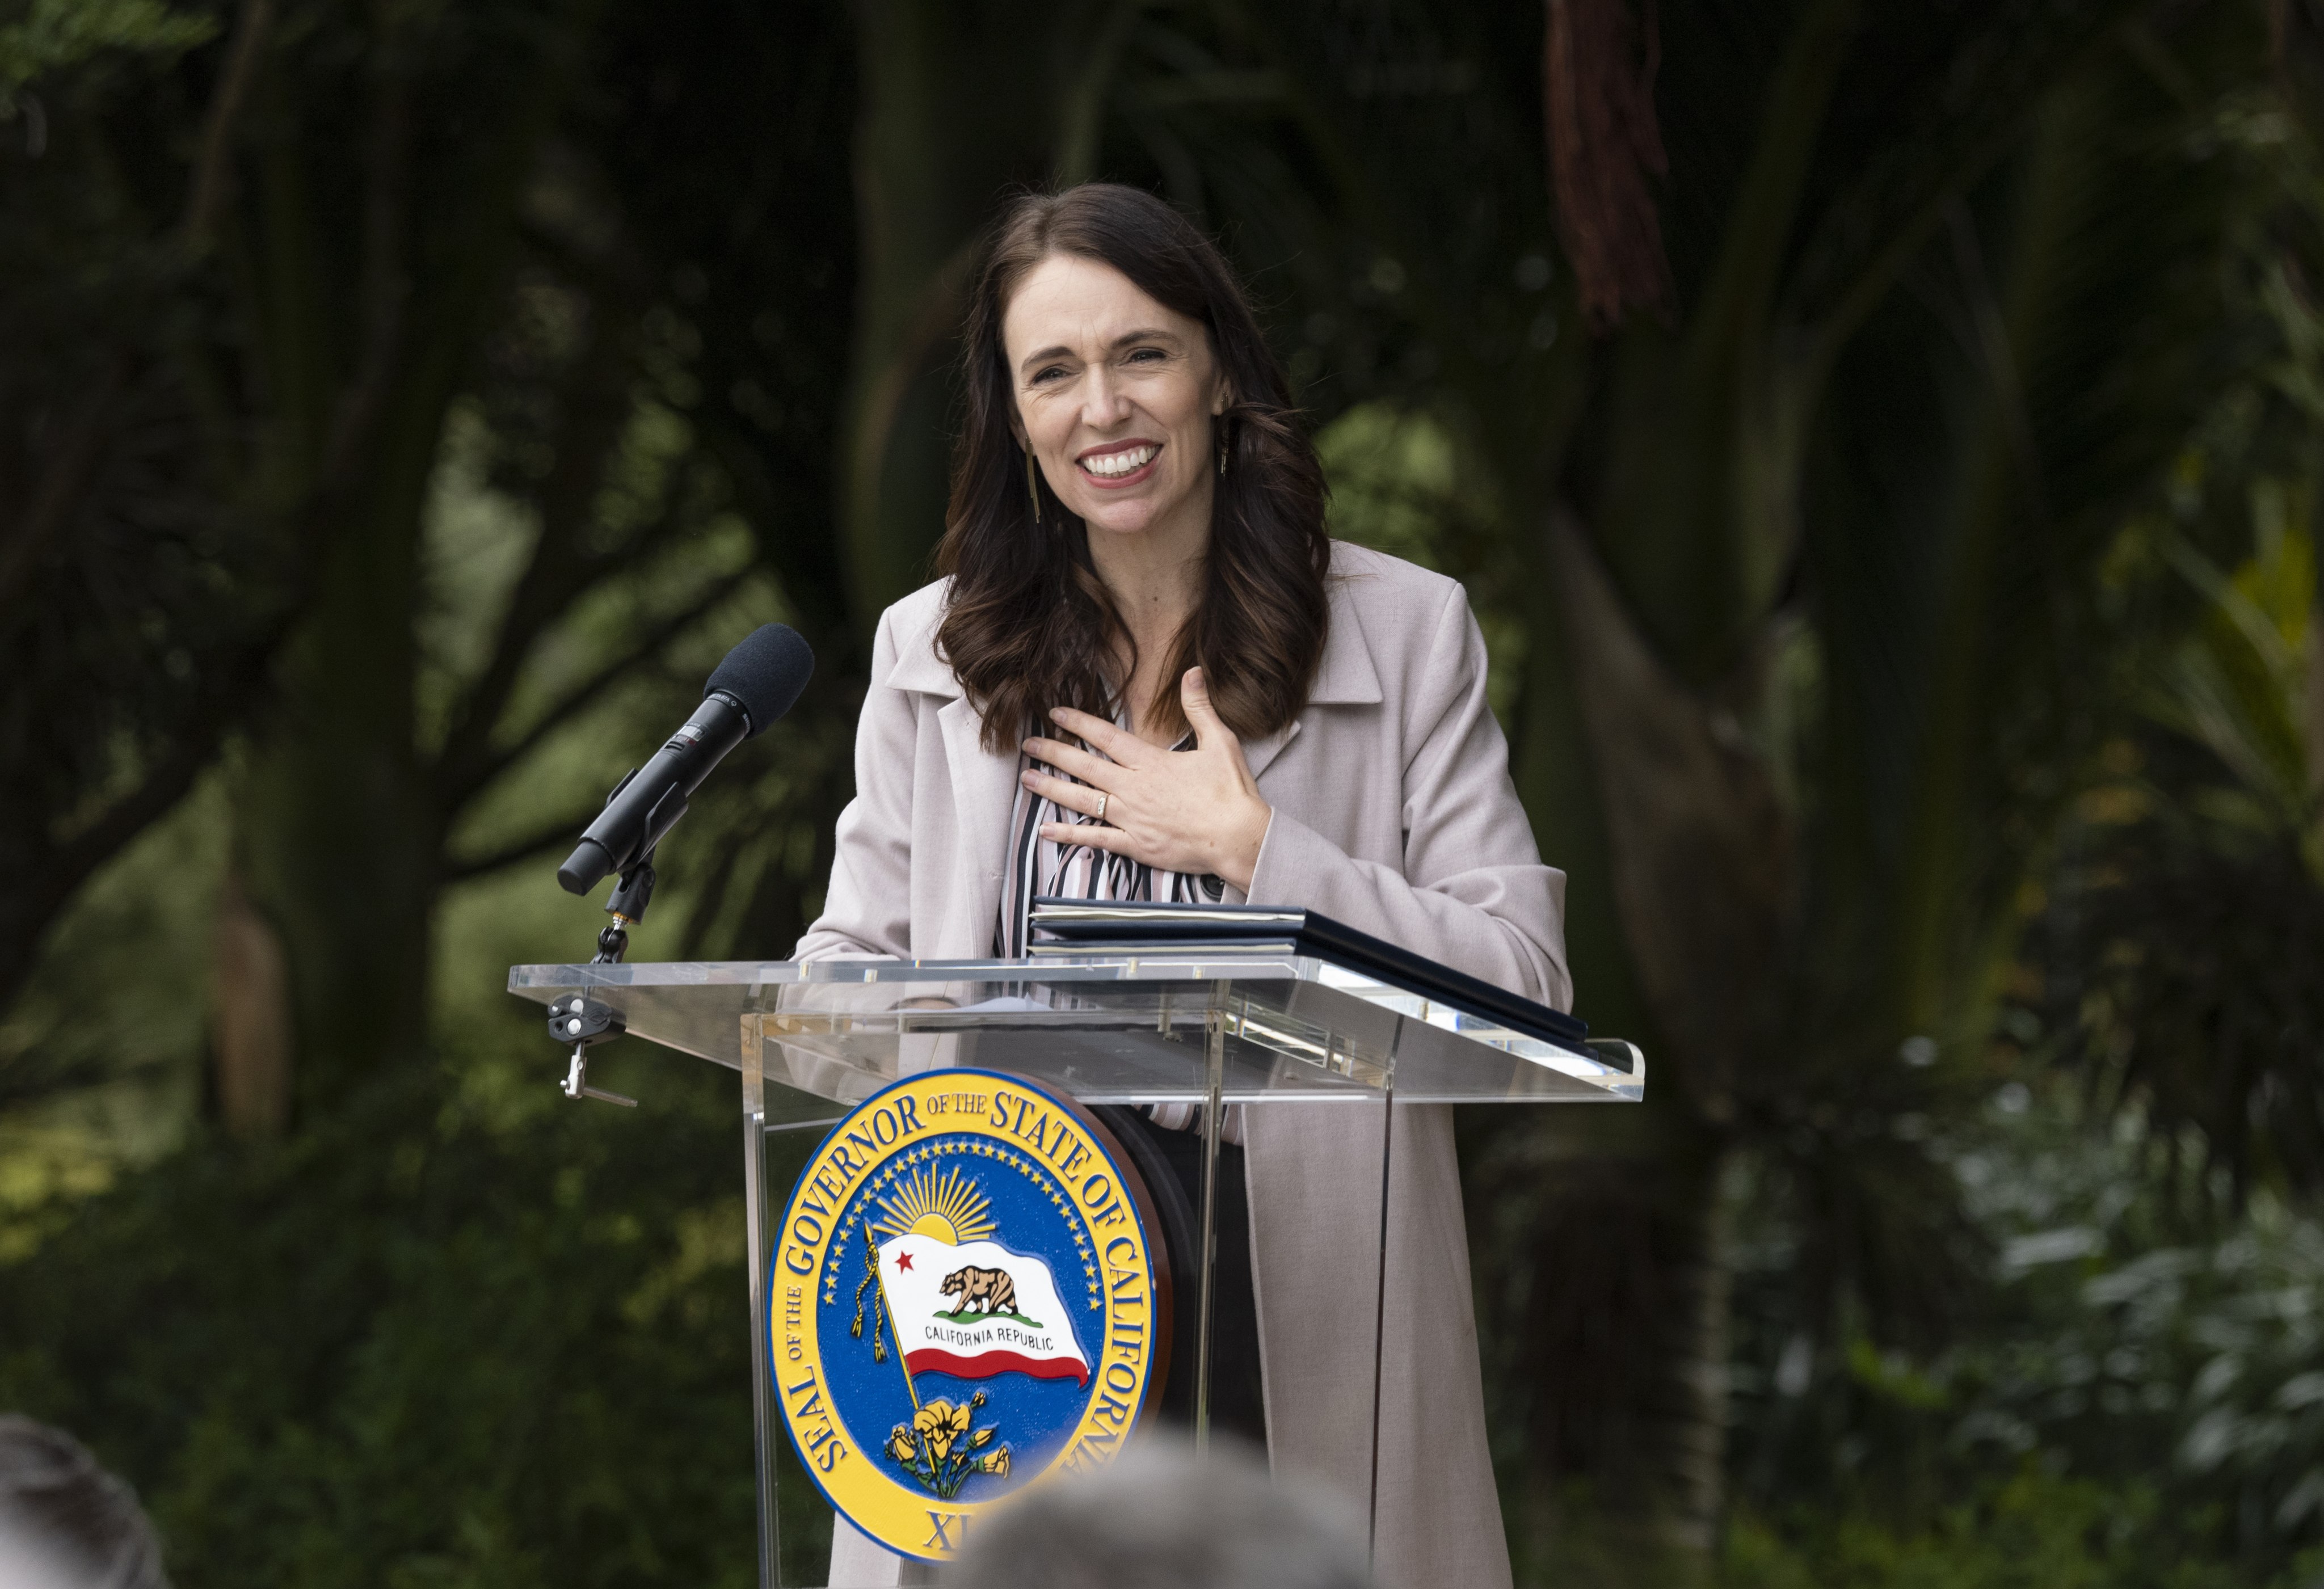 New Zealand Prime Minister Jacinda Ardern says China’s “pace of engagement” has increased in the Pacific but defended New Zealand’s own efforts in the region calling the relationship “naturally different”. Photo: EPA-EFE